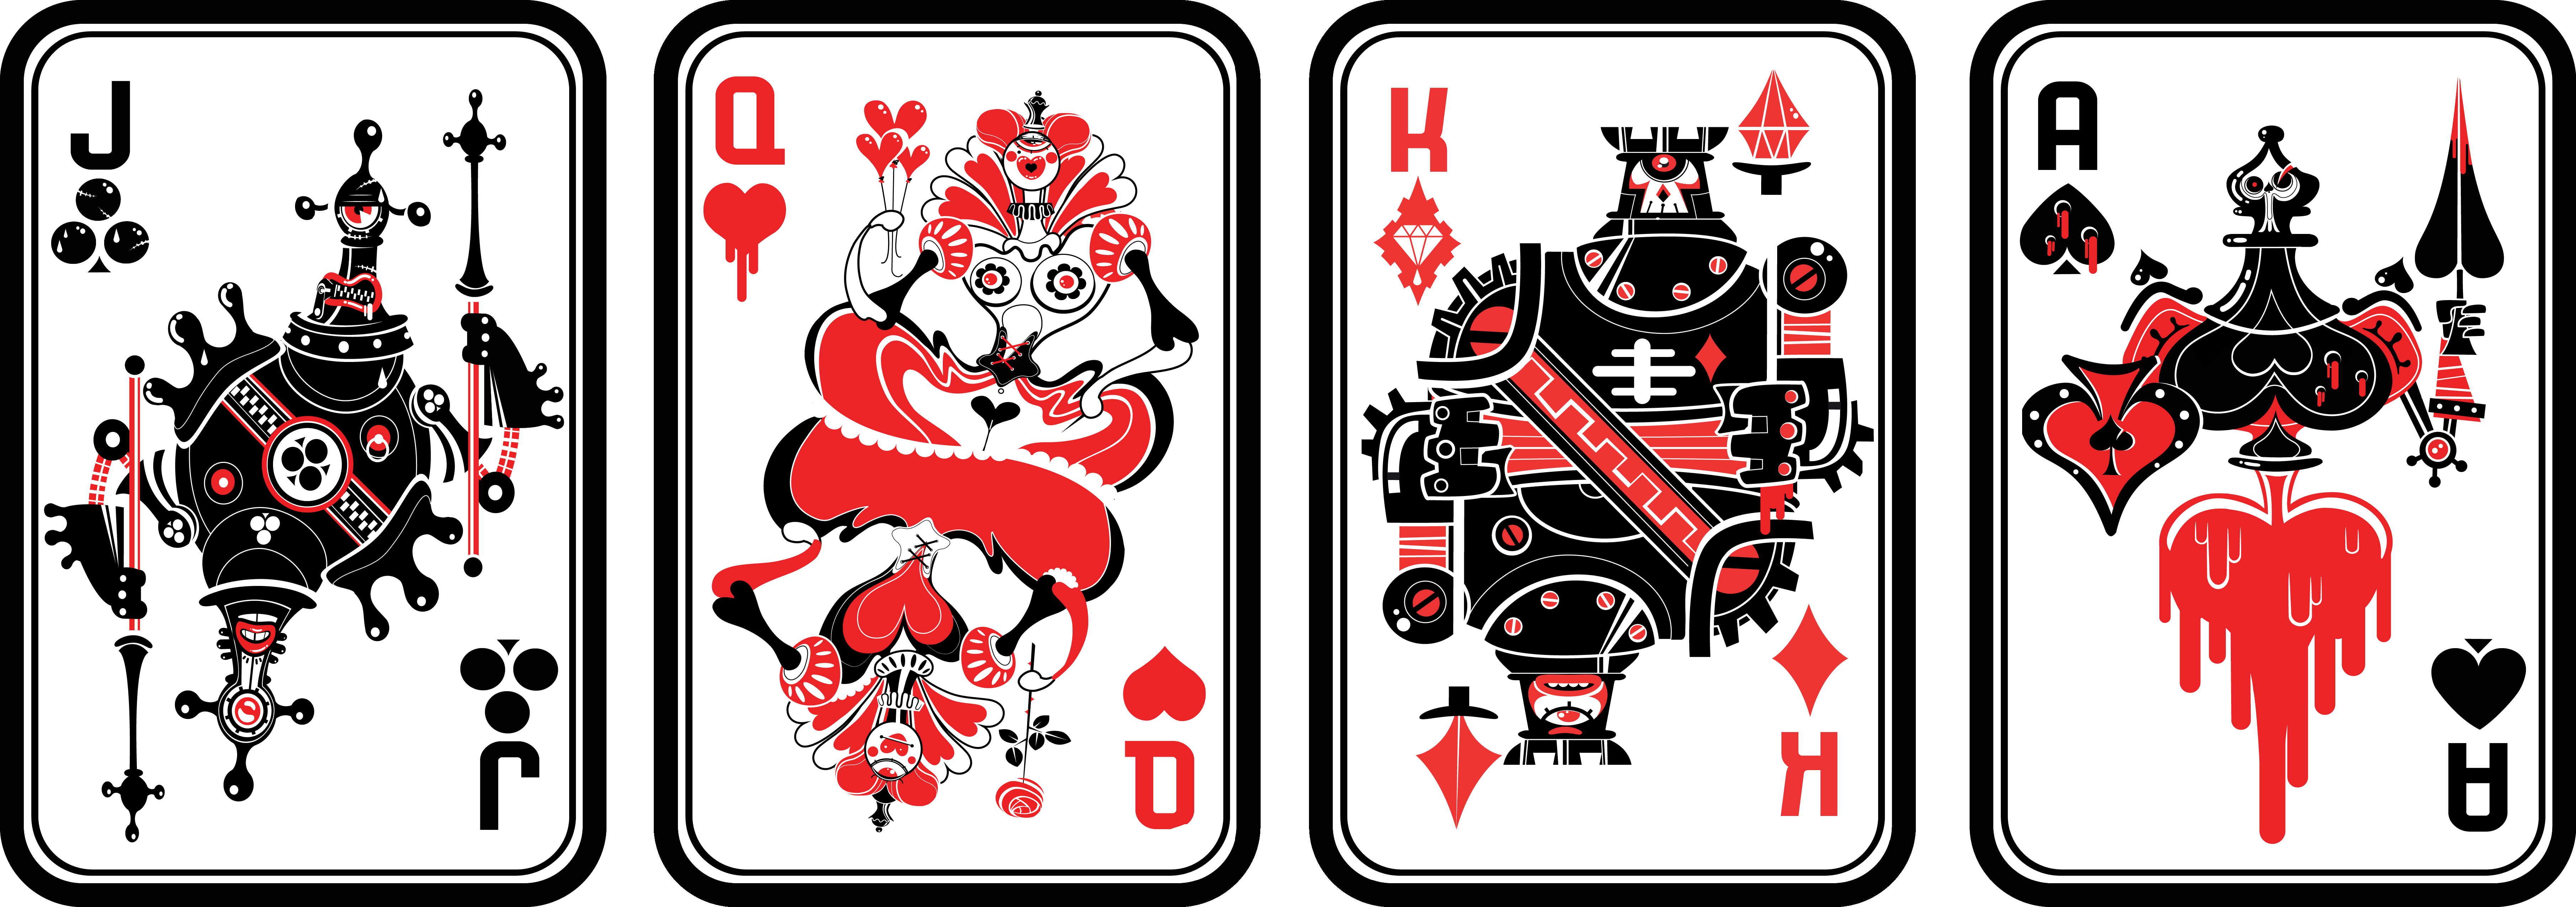 Royal Flush/ commissioned custommade playingcards iZeMo